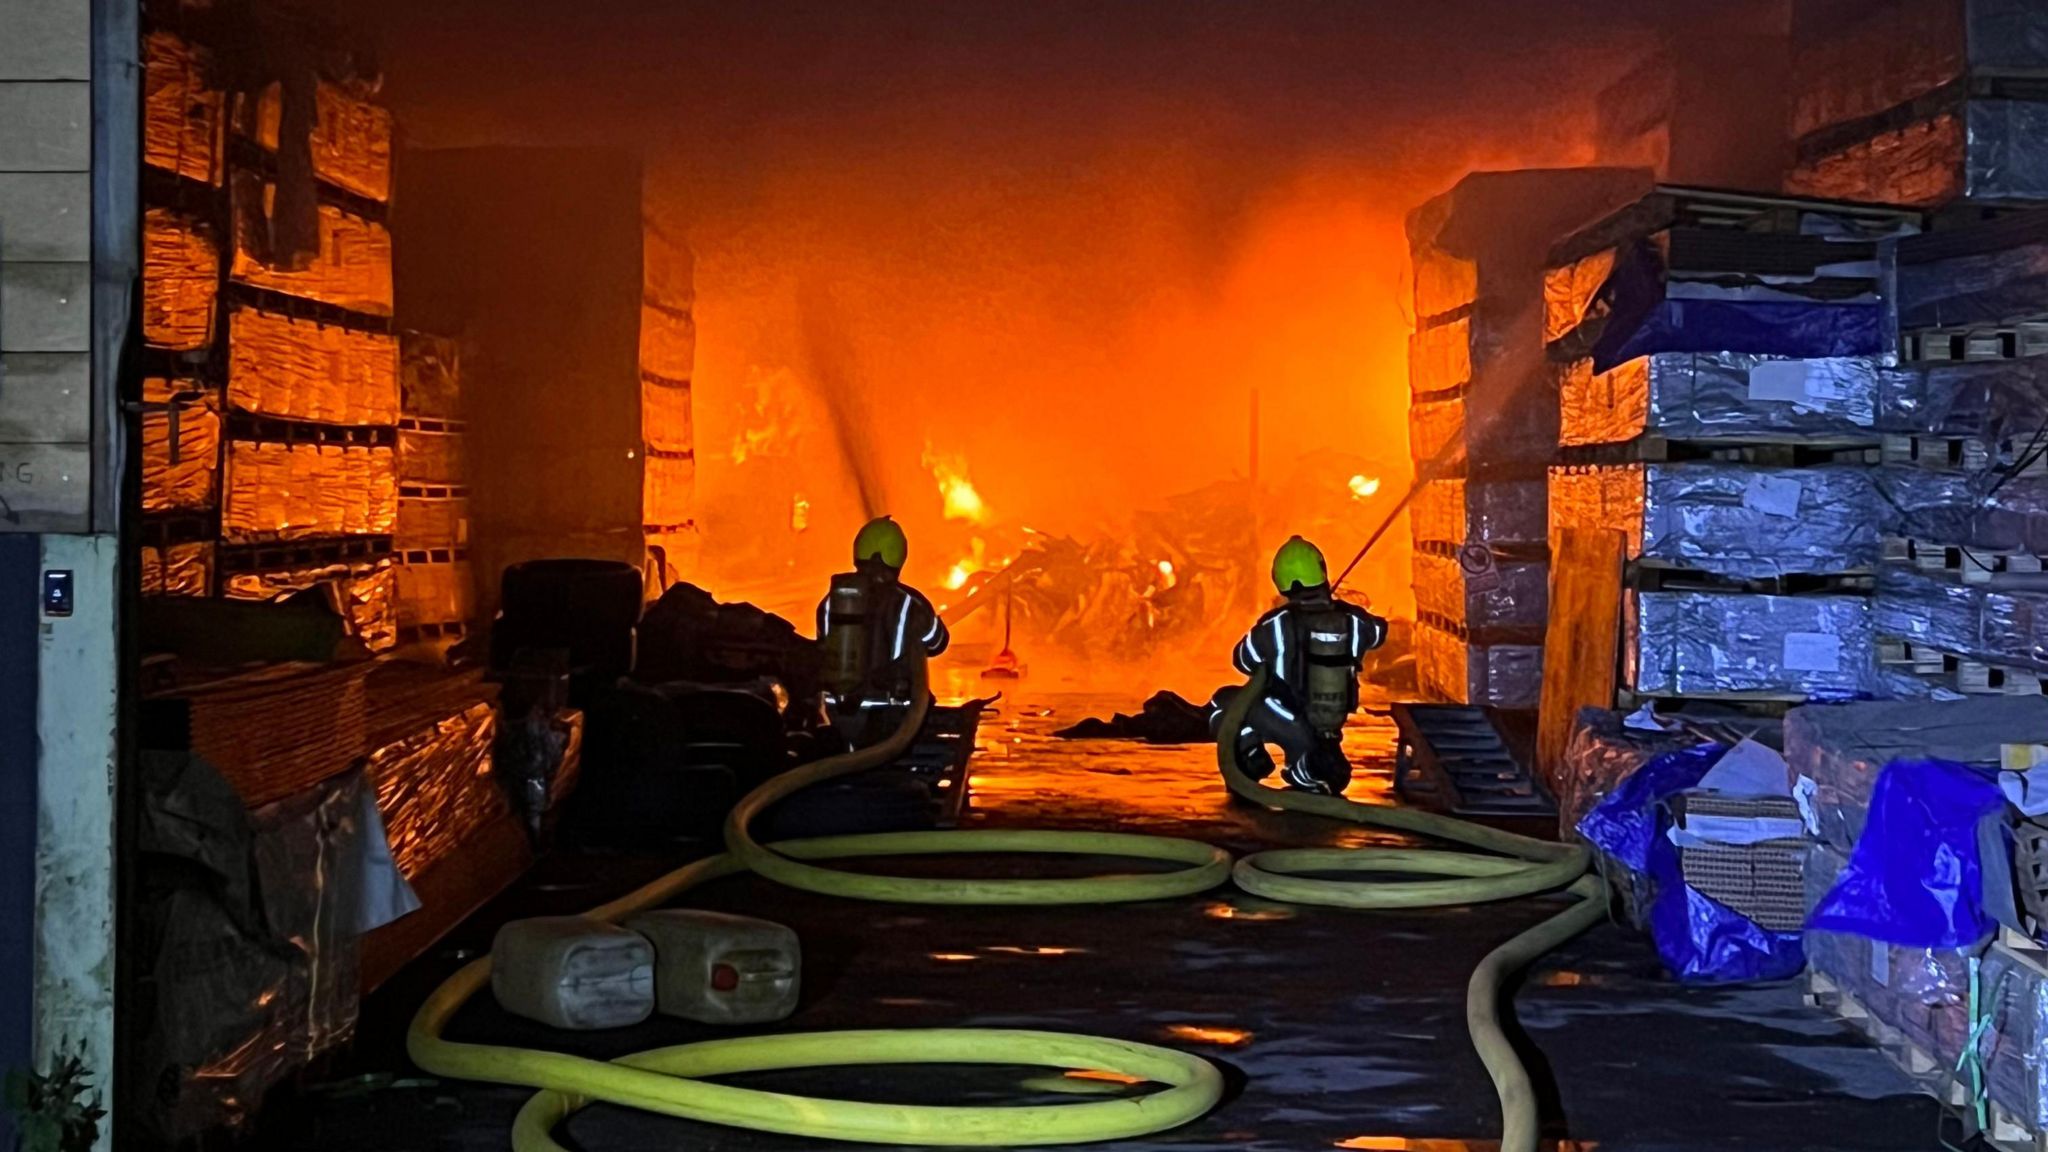 Firefighters tackle the fire which is seen burning inside a building